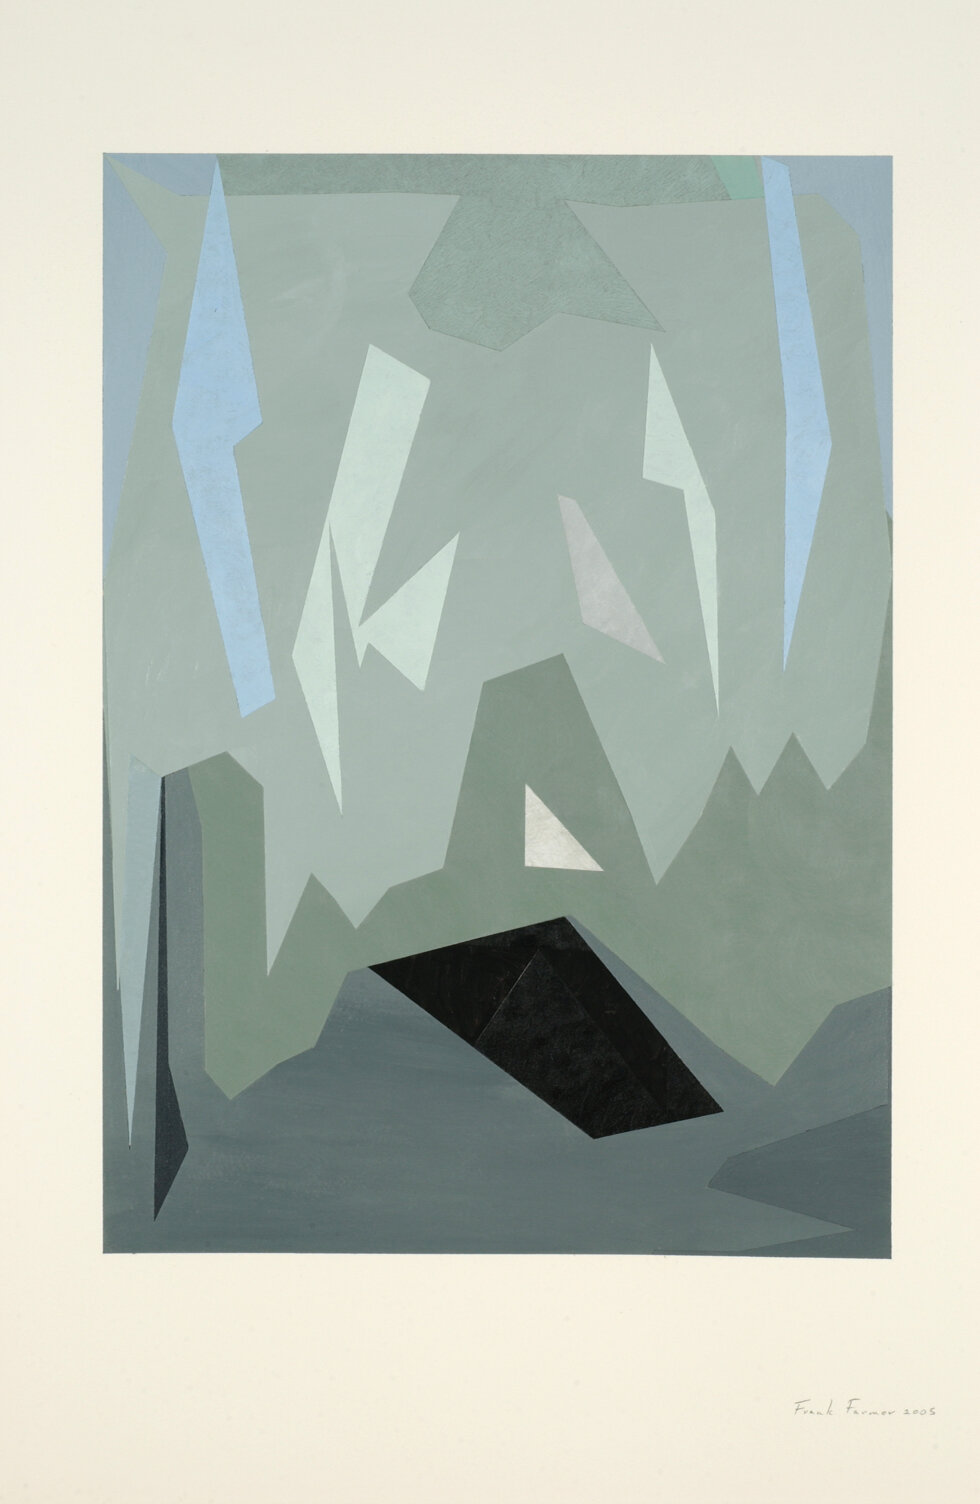  Frank Farmer  L’Abbey de Pontigny,  2005   Acrylic on paper  Paper size: 30 x 22 inches   Image size: 19.5 x 14 inches   